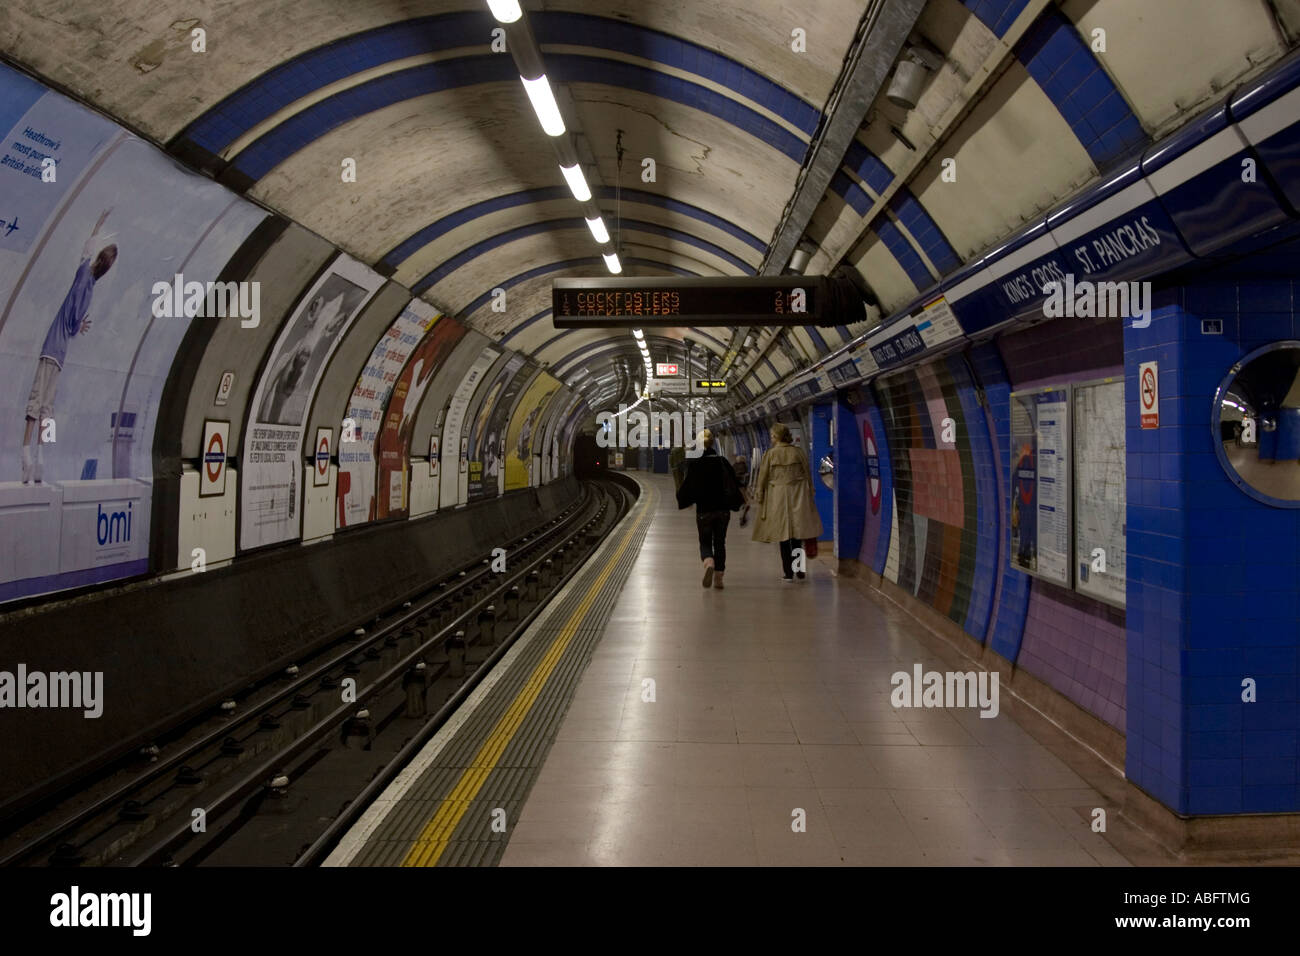 Piccadilly Line - Kings Cross Station - London Stockfoto